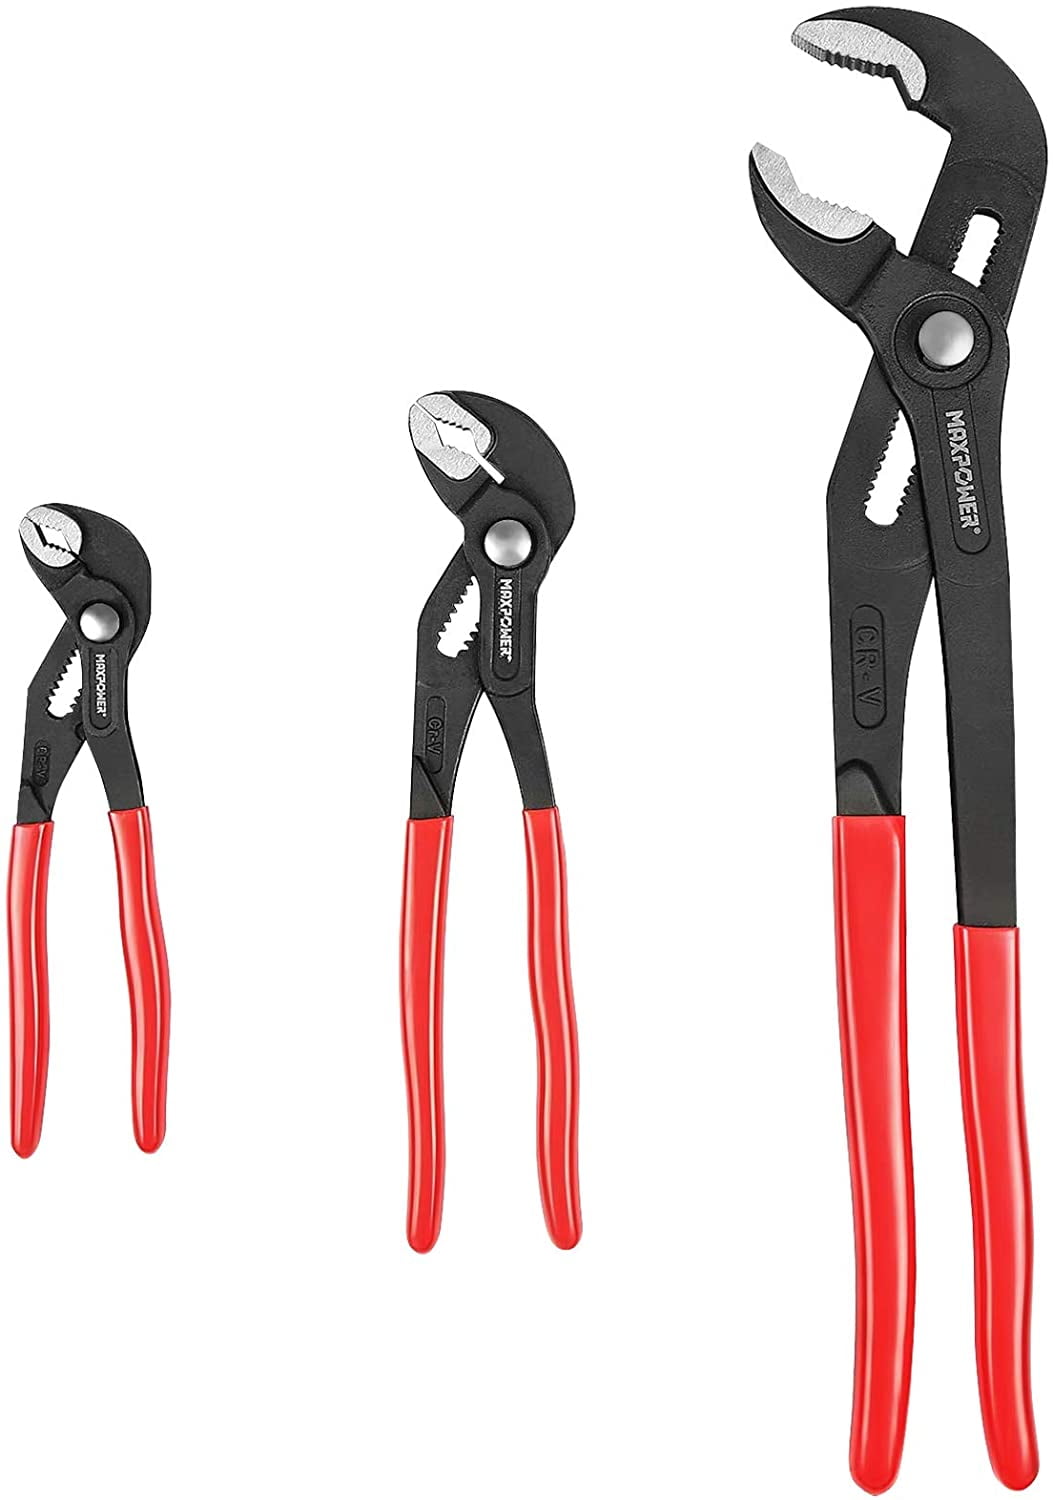 Knipex Soft Jaw Water Pump Pliers 250mm Push Button Plastic Pipe Grips 81  11 250 4003773078470